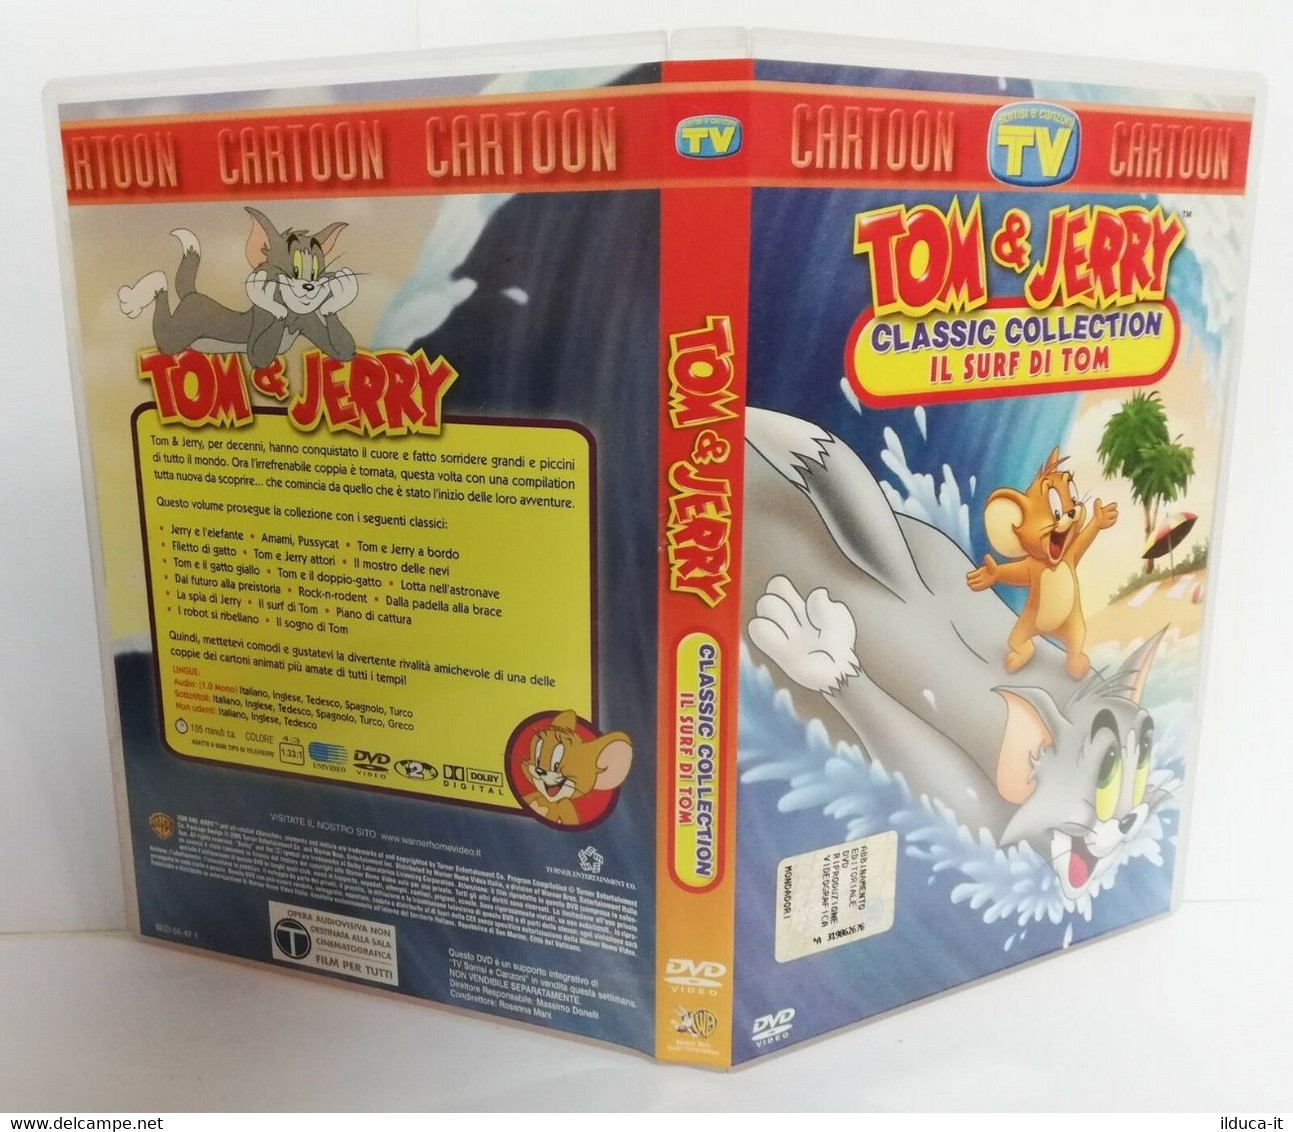 01744 DVD - TOM & JERRY Classic Collection Vol. 12 - Il Surf Di Tom - Animation